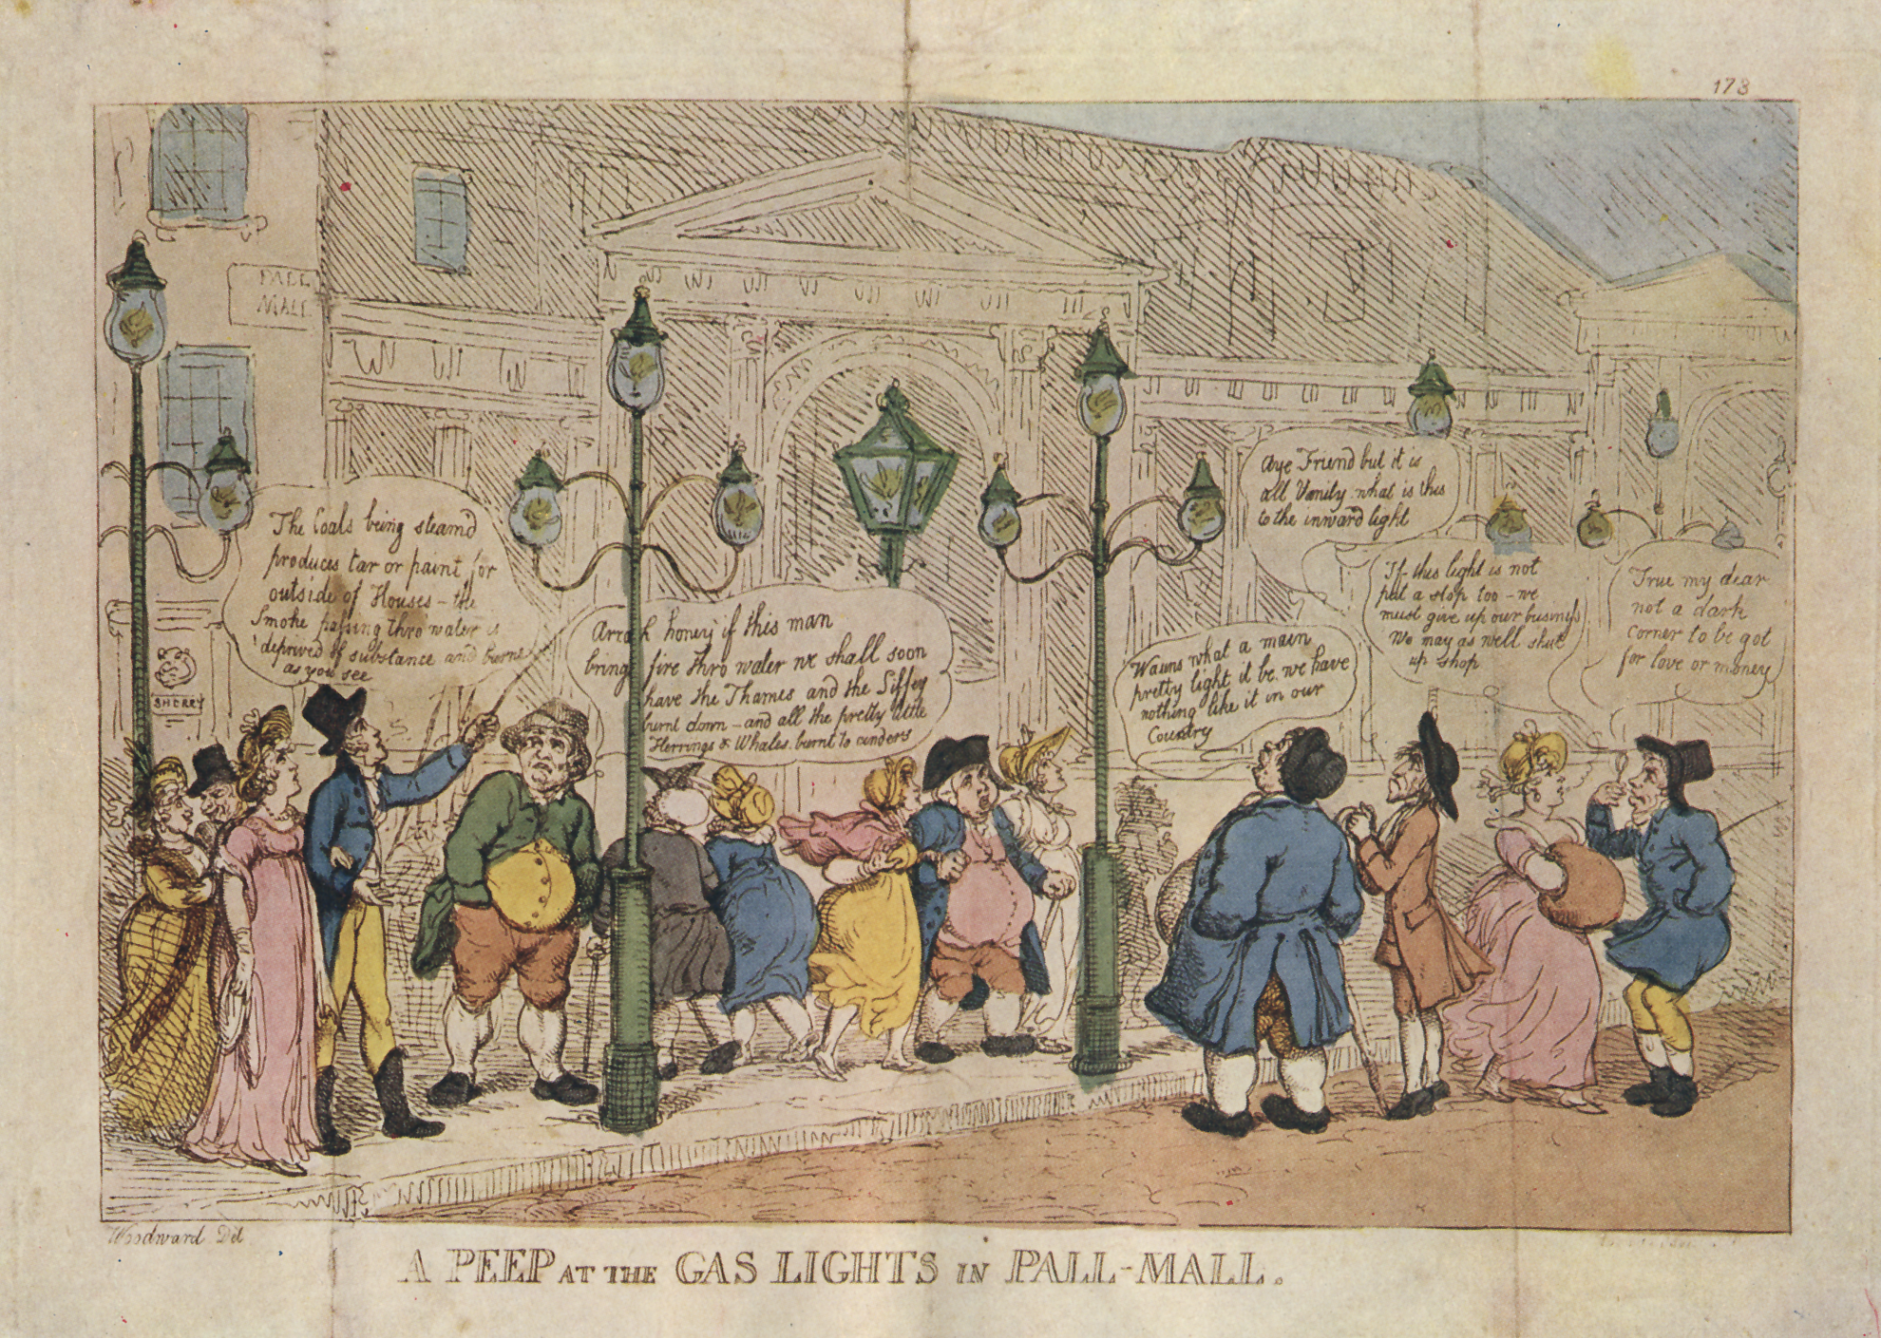 Fig. 2: George M. Woodward, “A Peep at the Gas Lights in Pall Mall”, 1808. Retrieved February 10, 2019, from https://commons.wikimedia.org/wiki/File:A_Peep_at_the_Gas_Lights_in_Pall_Mall.png, Public Domain US expired.